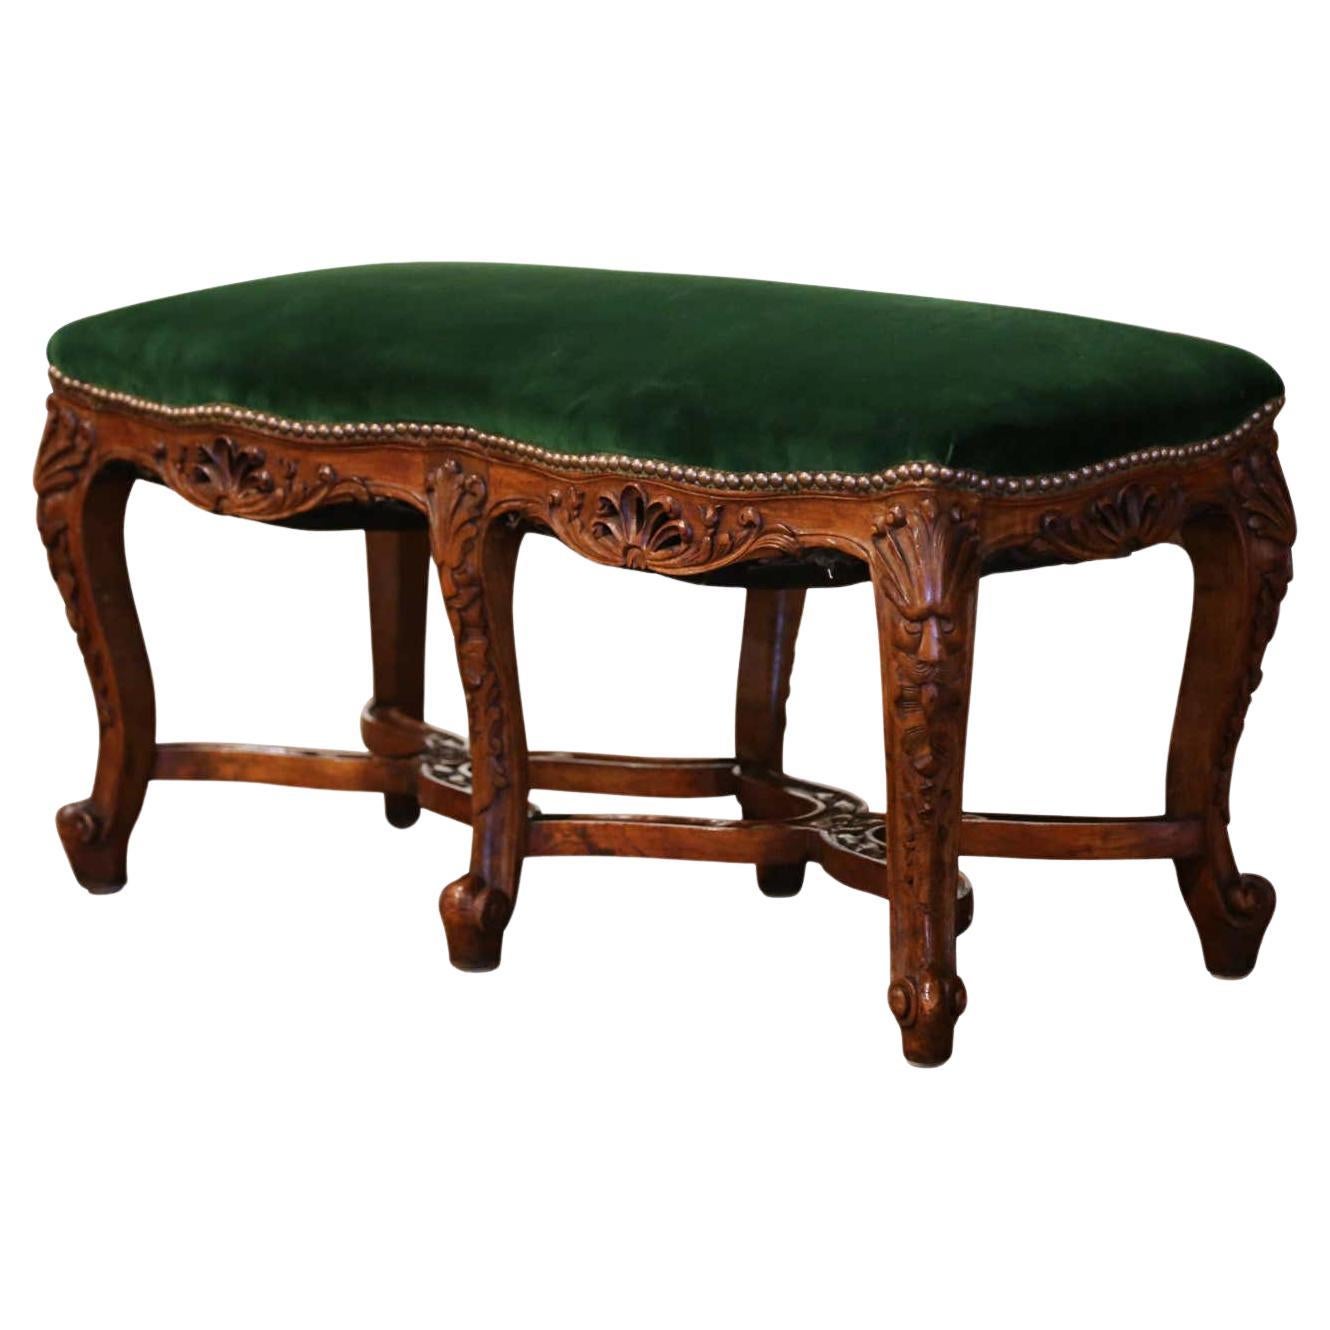 Early 20th Century French Louis XV Walnut Two Seat Bench with Green Velvet